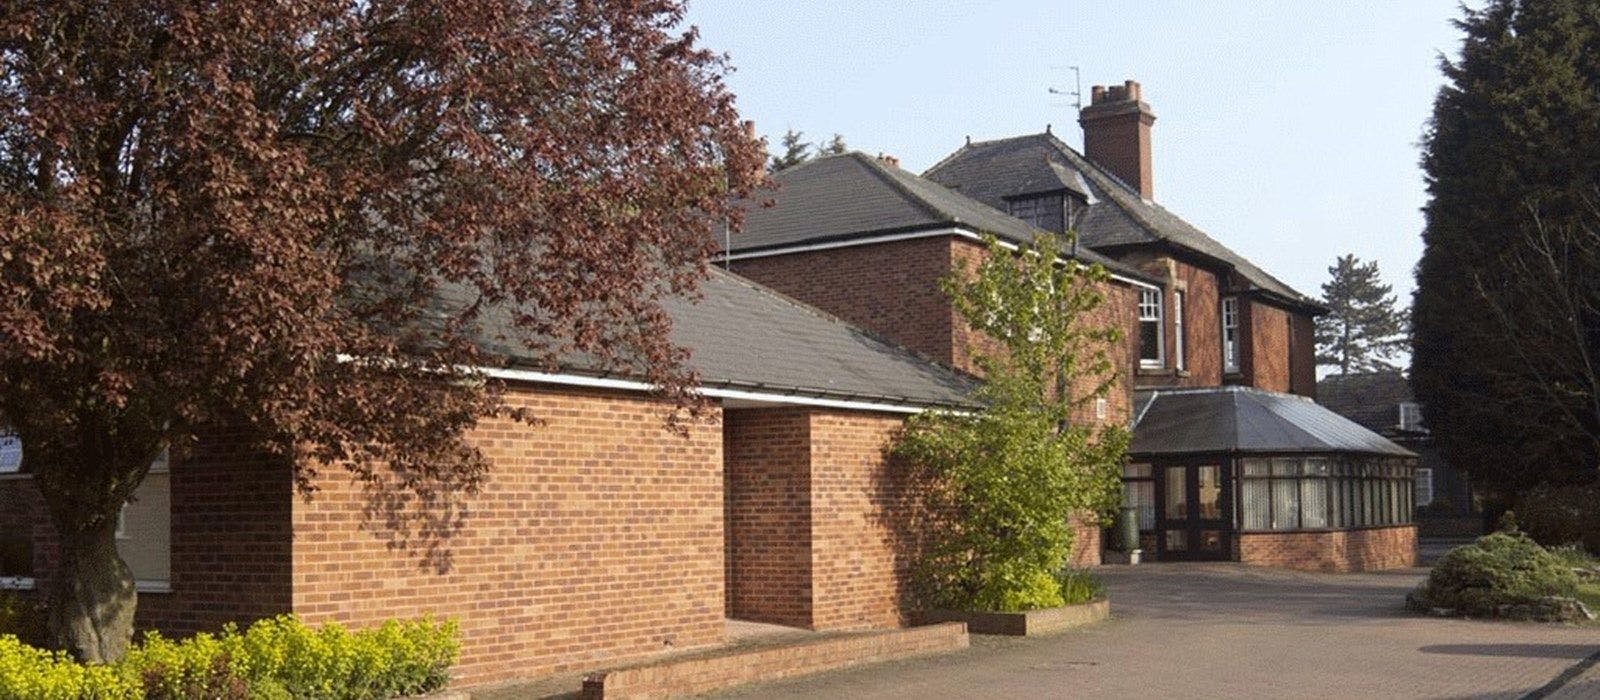 Exterior of Beech Tree House Care Home in Goole, East Riding of Yorkshire